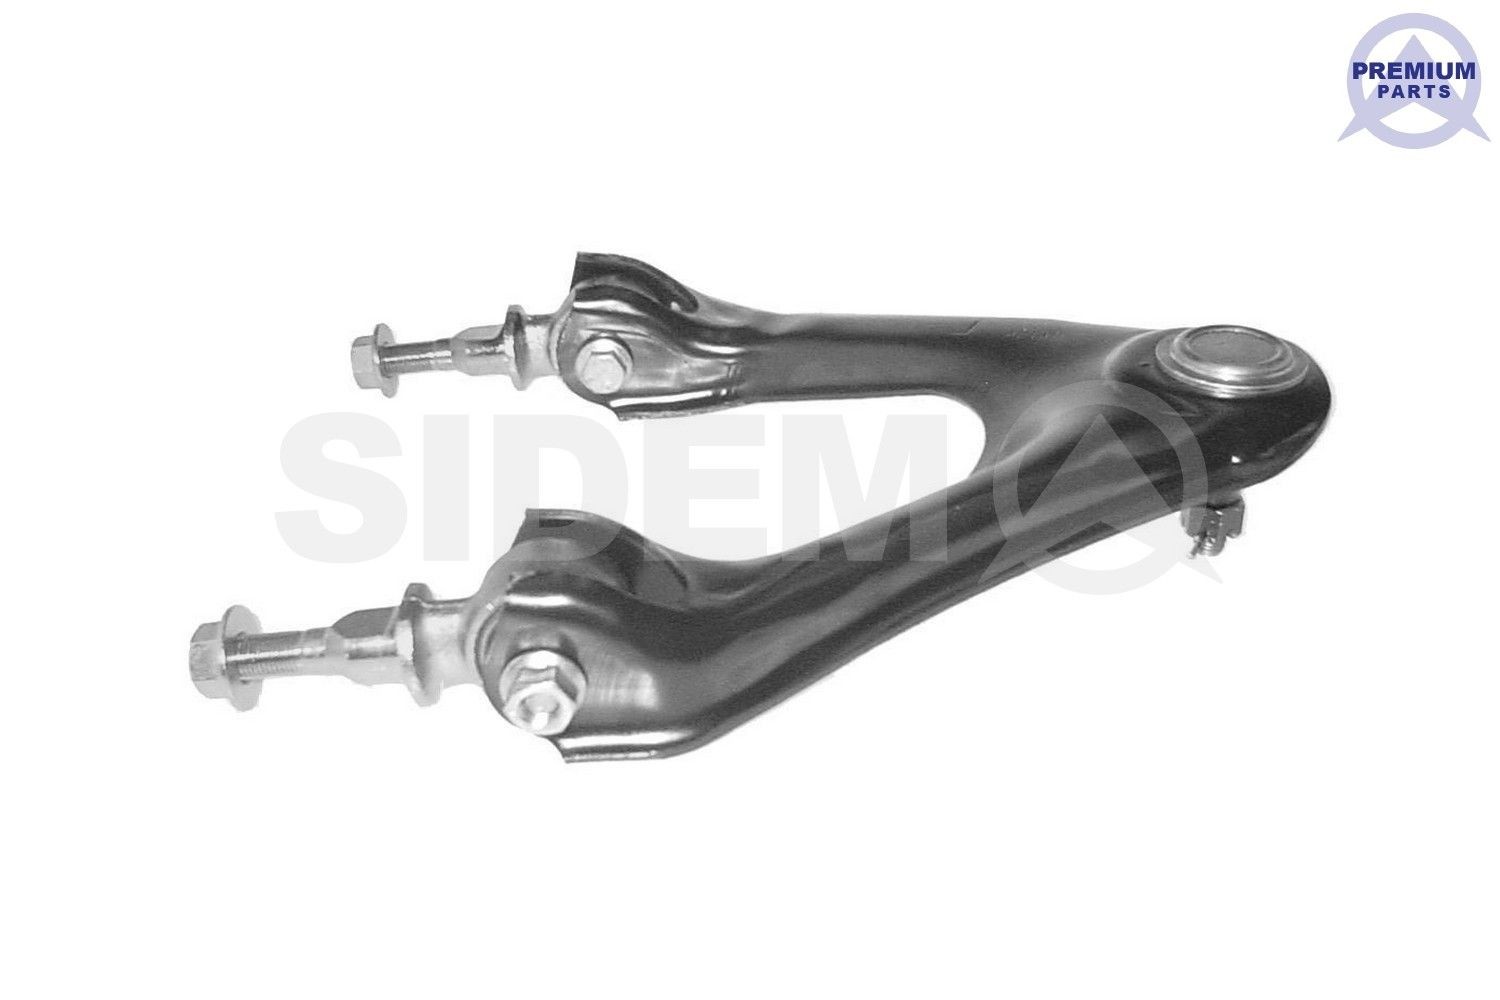 47673 SIDEM Control arm HONDA Upper, Front Axle Right, Control Arm, Sheet Steel, Cone Size: 12,9 mm, Push Rod